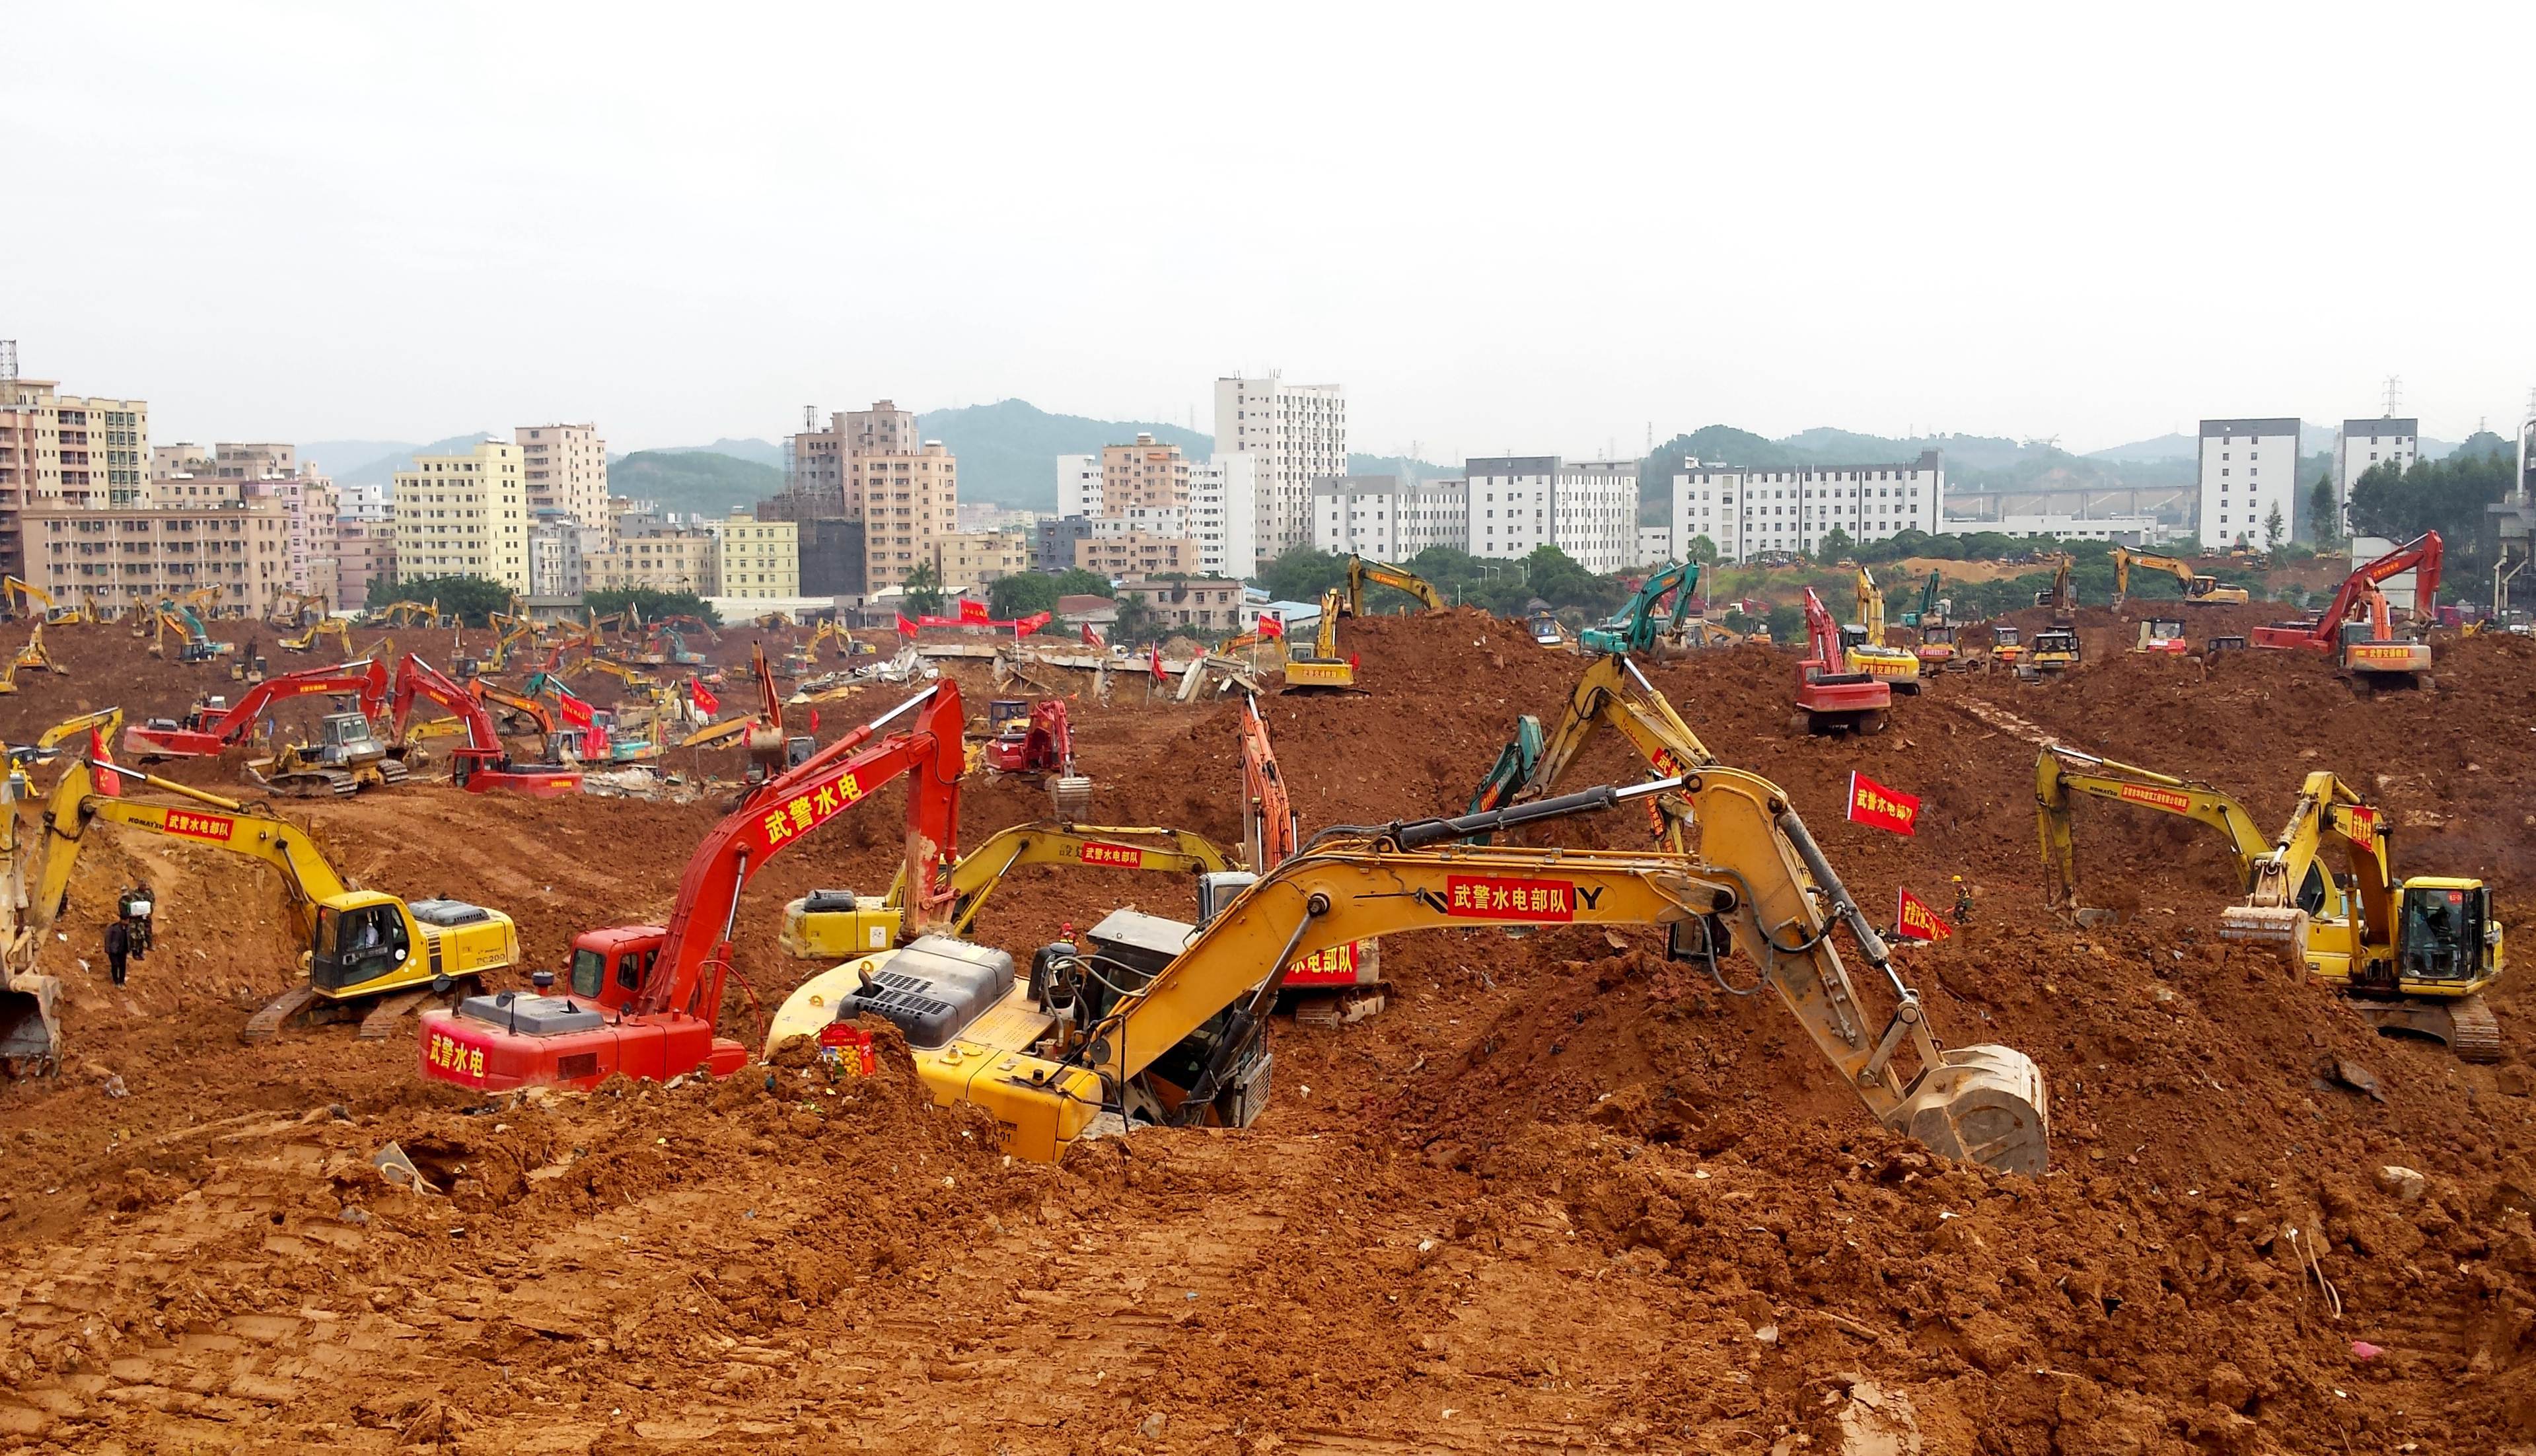 Excavators are seen working at the site of the landslide in an industrial area in Shenzhen, south China's Guangdong province on December 28, 2015. The head of an urban enforcement agency in the Chinese district where a huge landslide left scores of people missing has killed himself, authorities said on December 28. Xu Yuan'an, head of the City Urban Administrative and Law Enforcement Bureau for Shenzhen's Guangming New District, jumped to his death on December 27, according to a post on an official police social media account. CHINA OUT AFP PHOTO